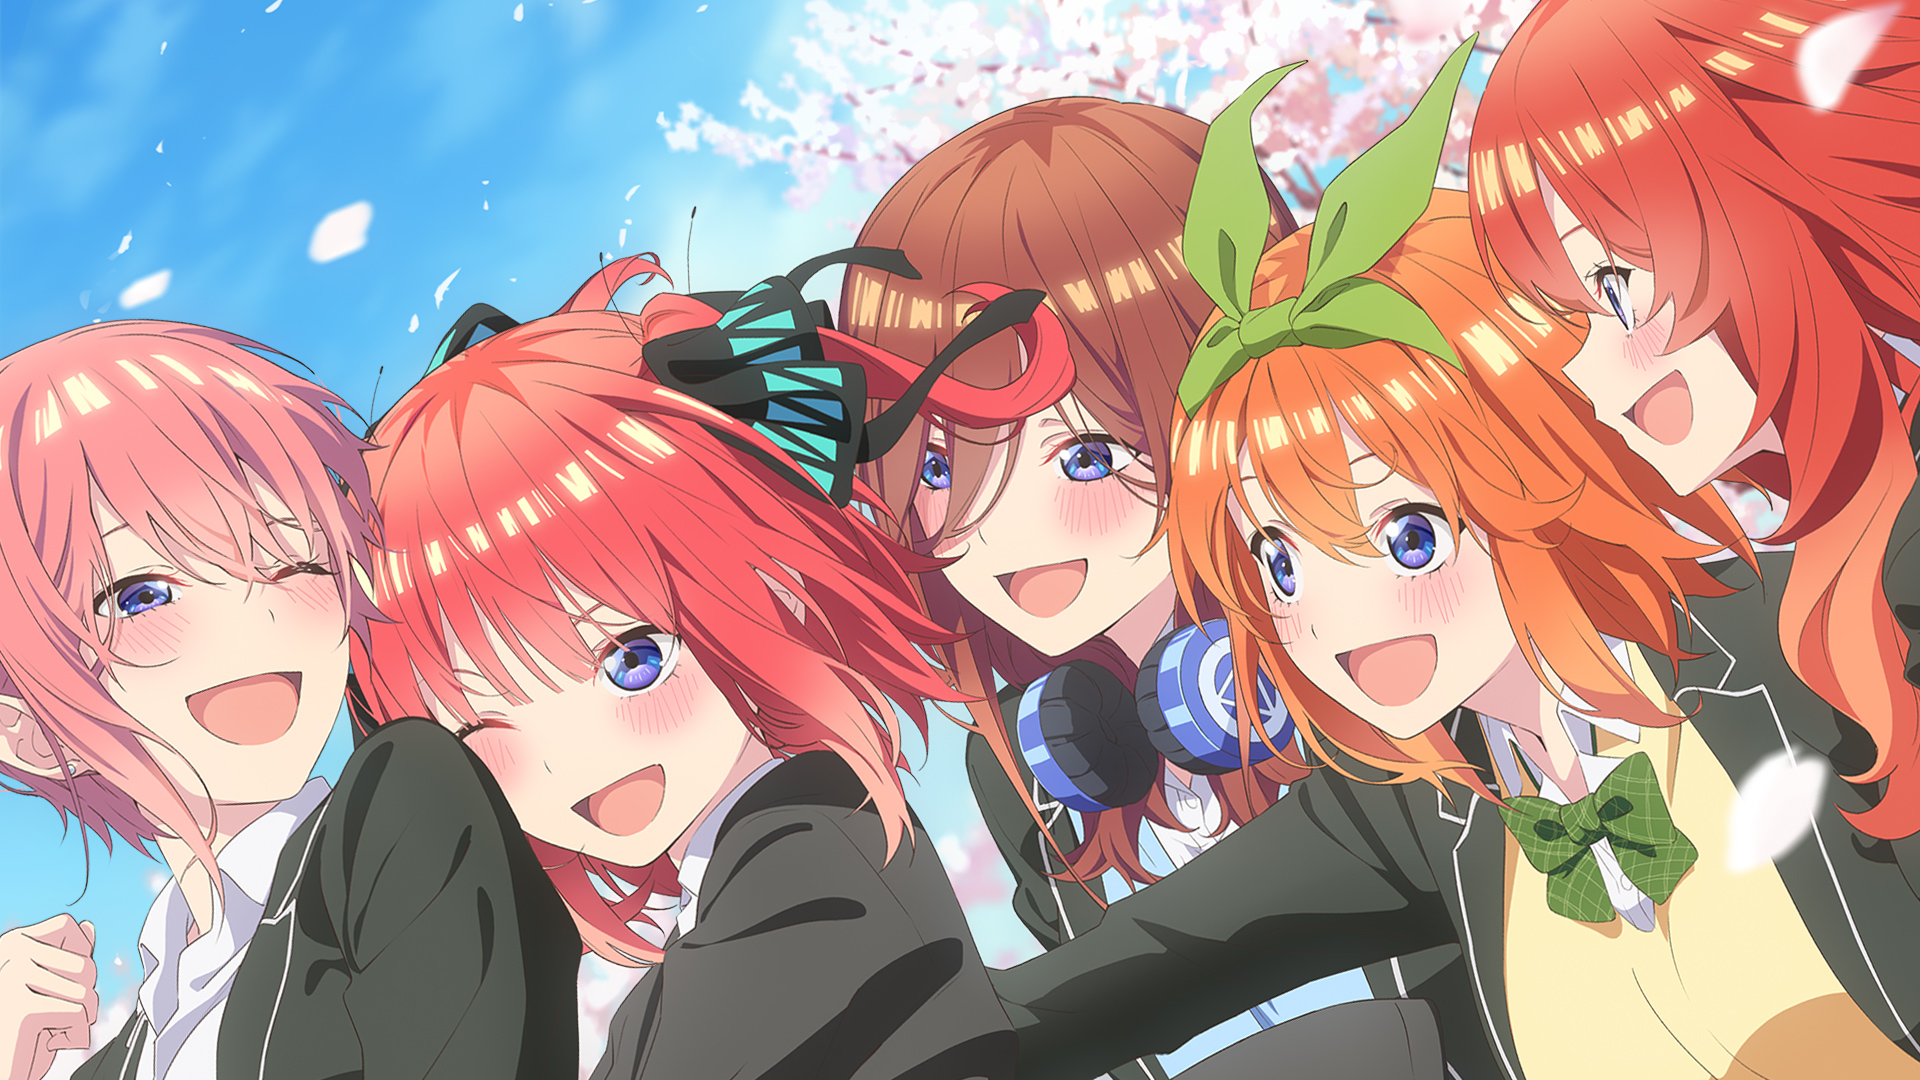 The Quintessential Quintuplets 2nd Season Postponed to January 2021